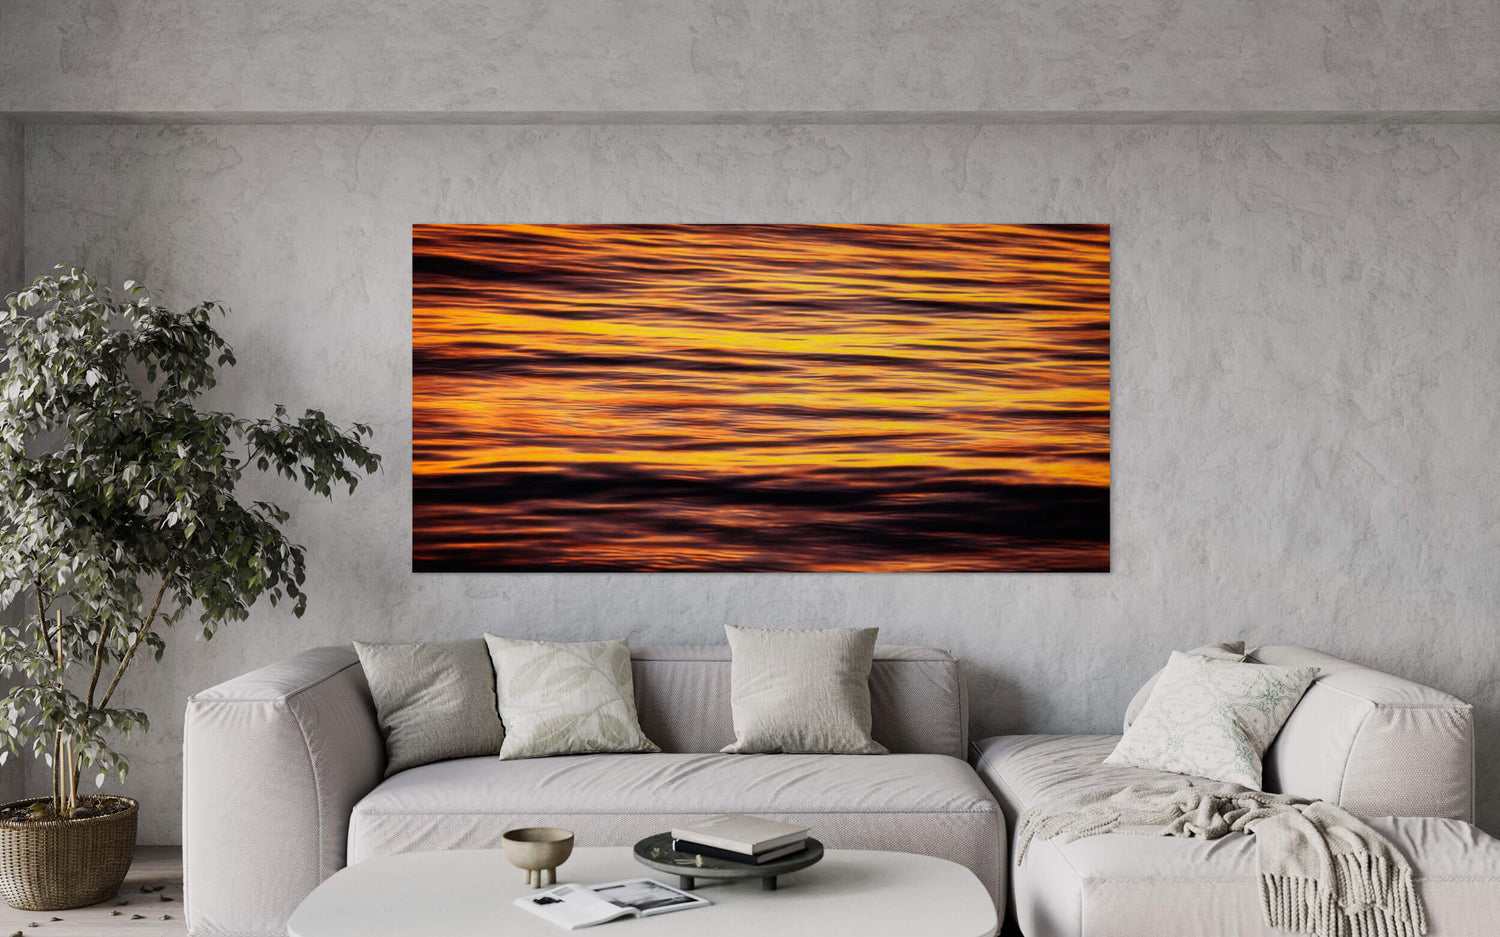 A sunset picture from Key West, Florida, hangs in a living room.